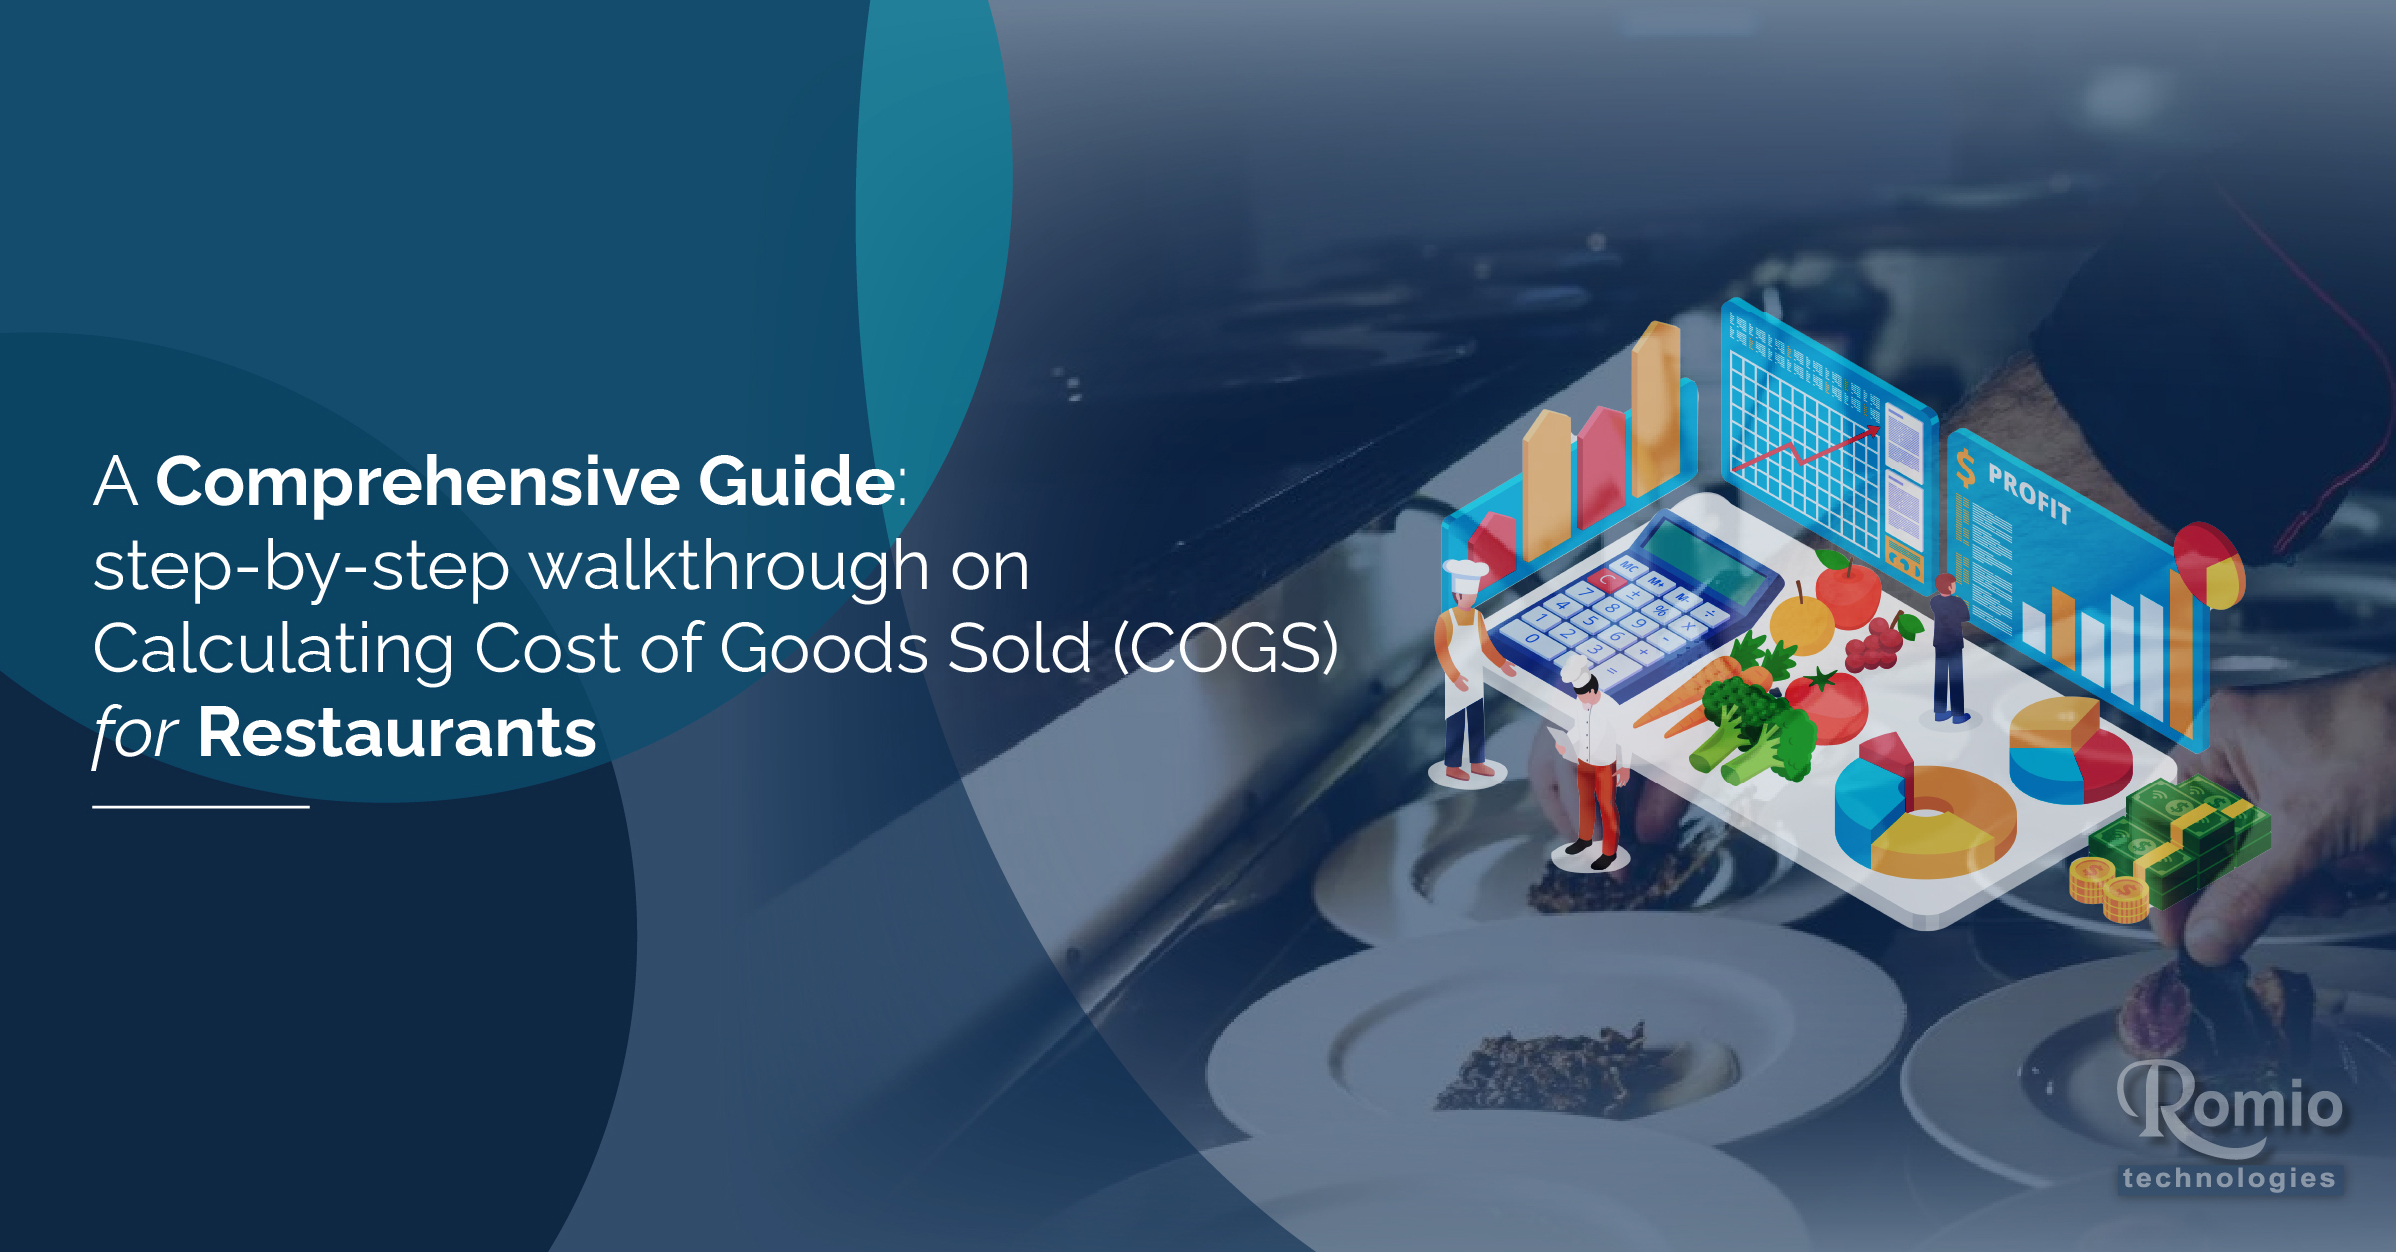 A Comprehensive Guide - Step-by-Step Walkthrough on Calculating Cost of Goods Sold (COGS) for Restaurants